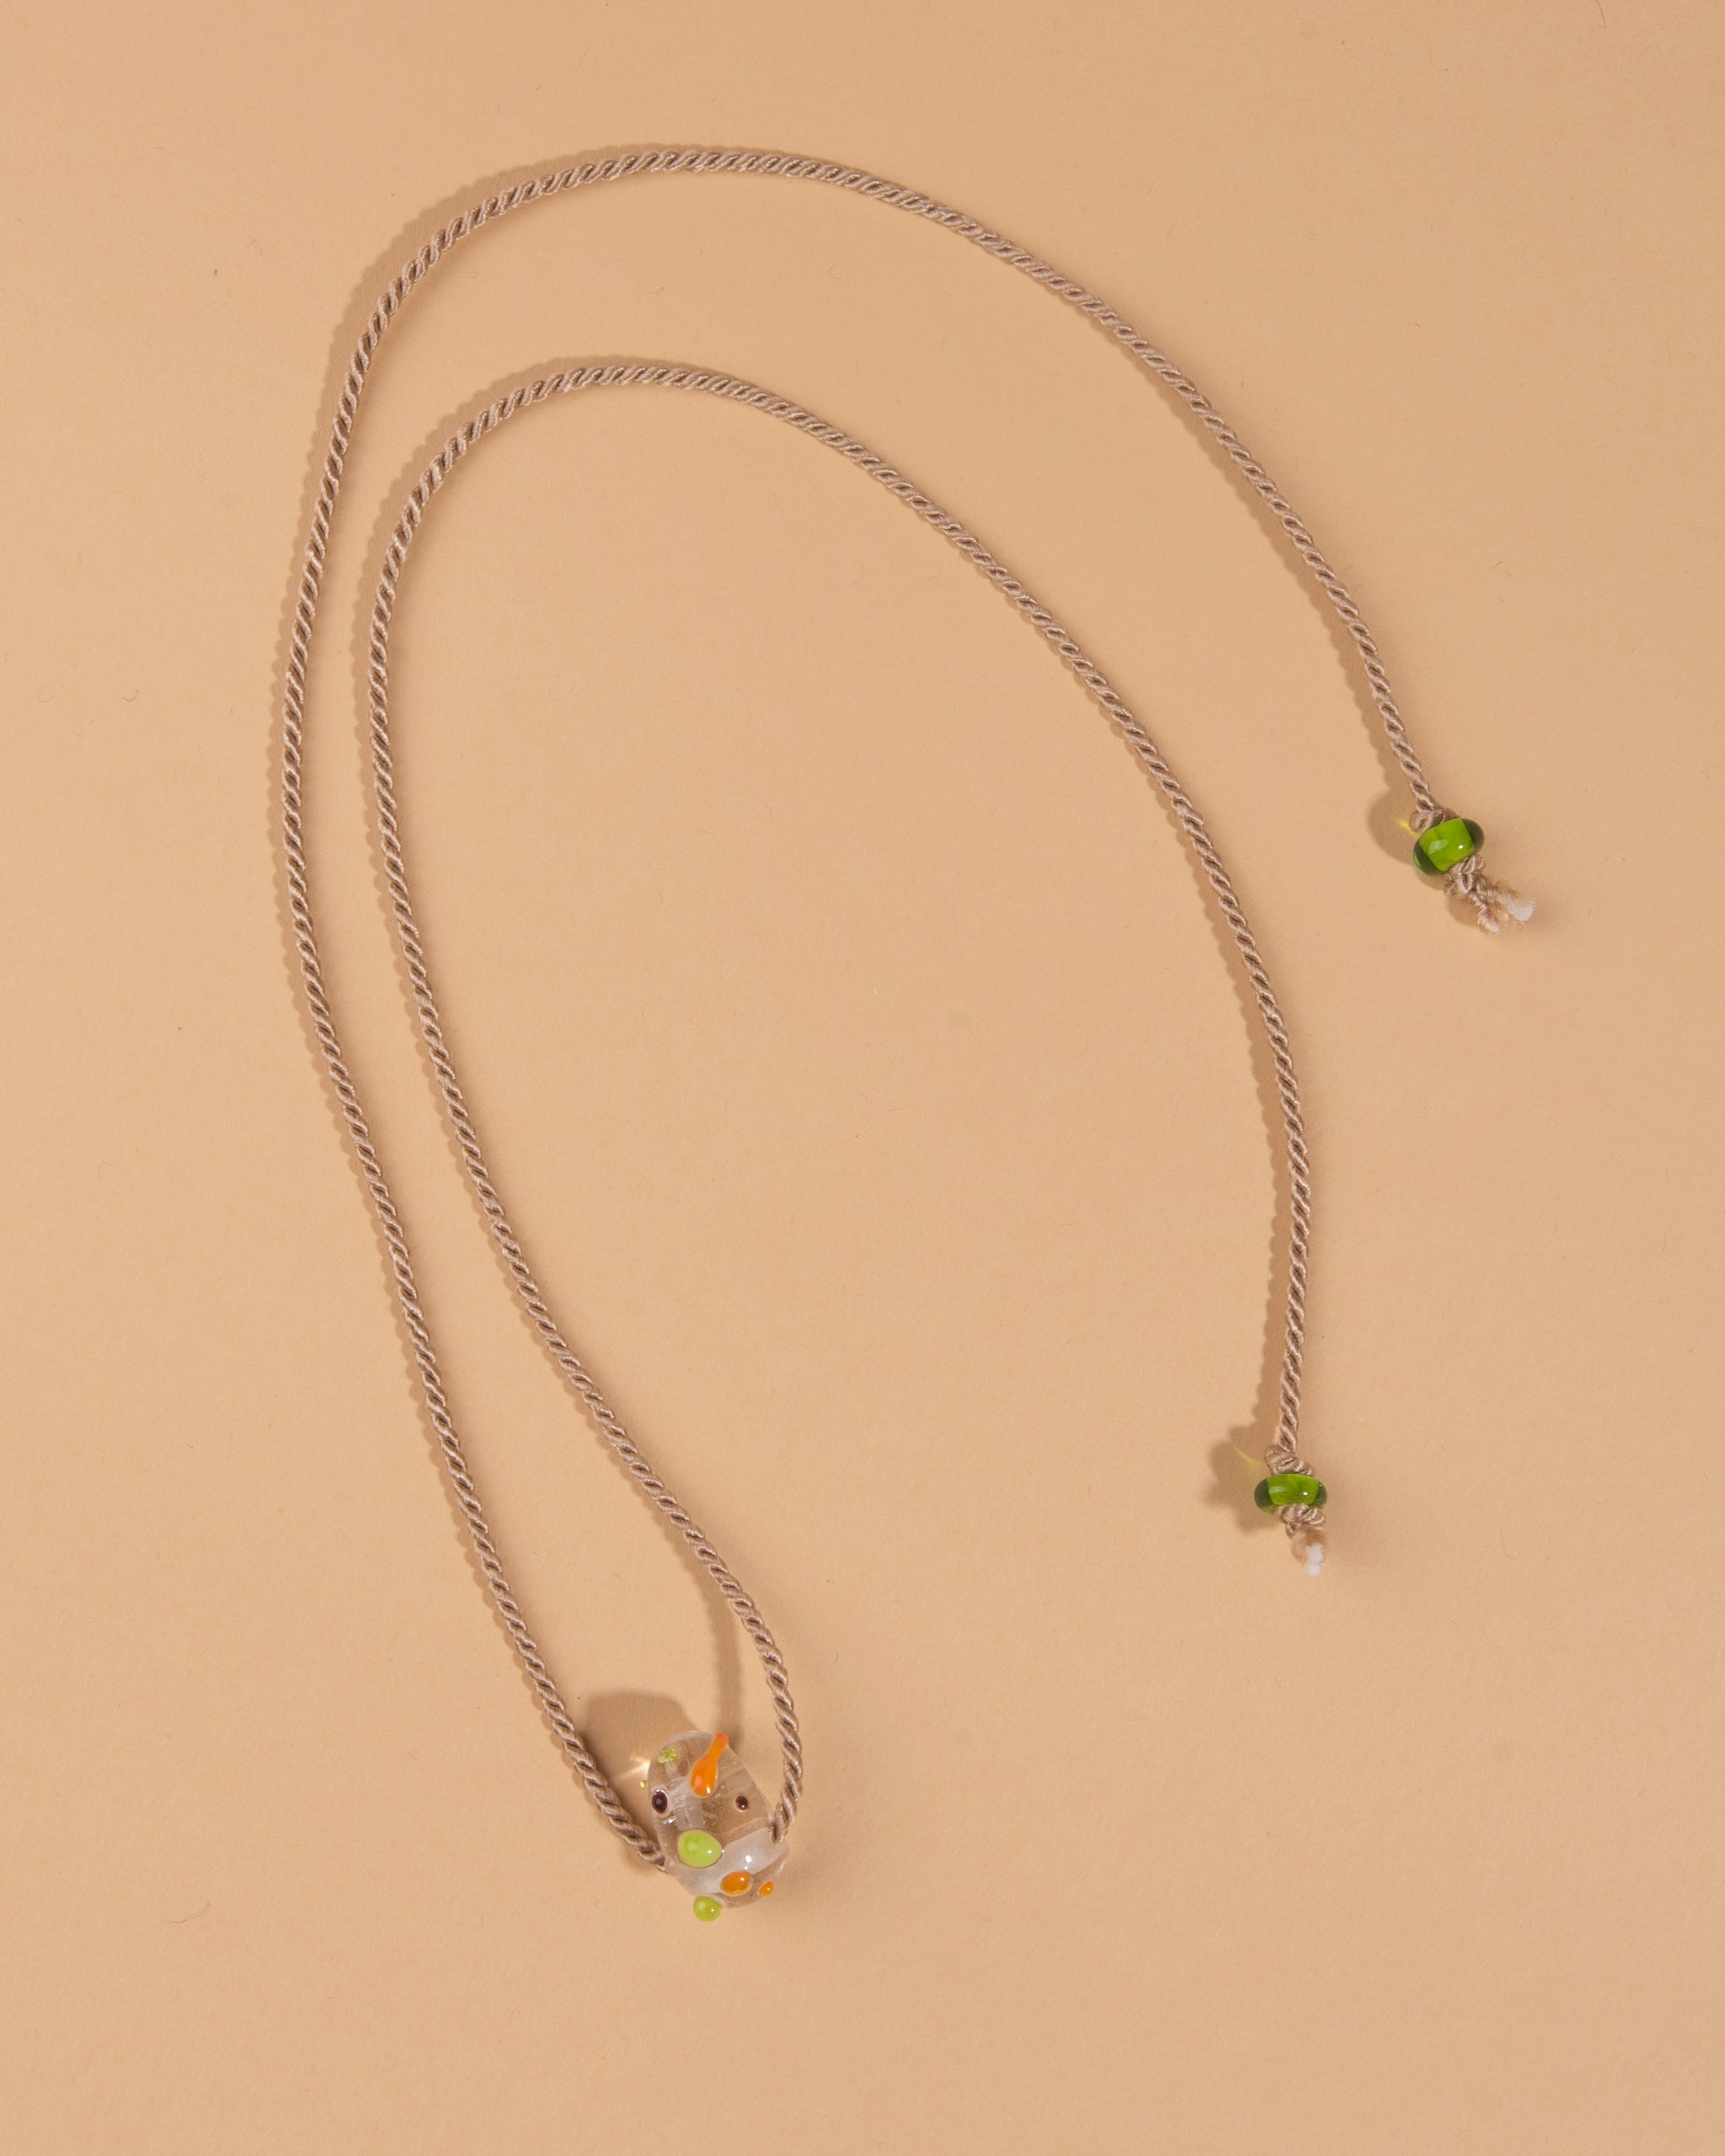 Glass Bead and Rope Necklace – Lime Green Confetti